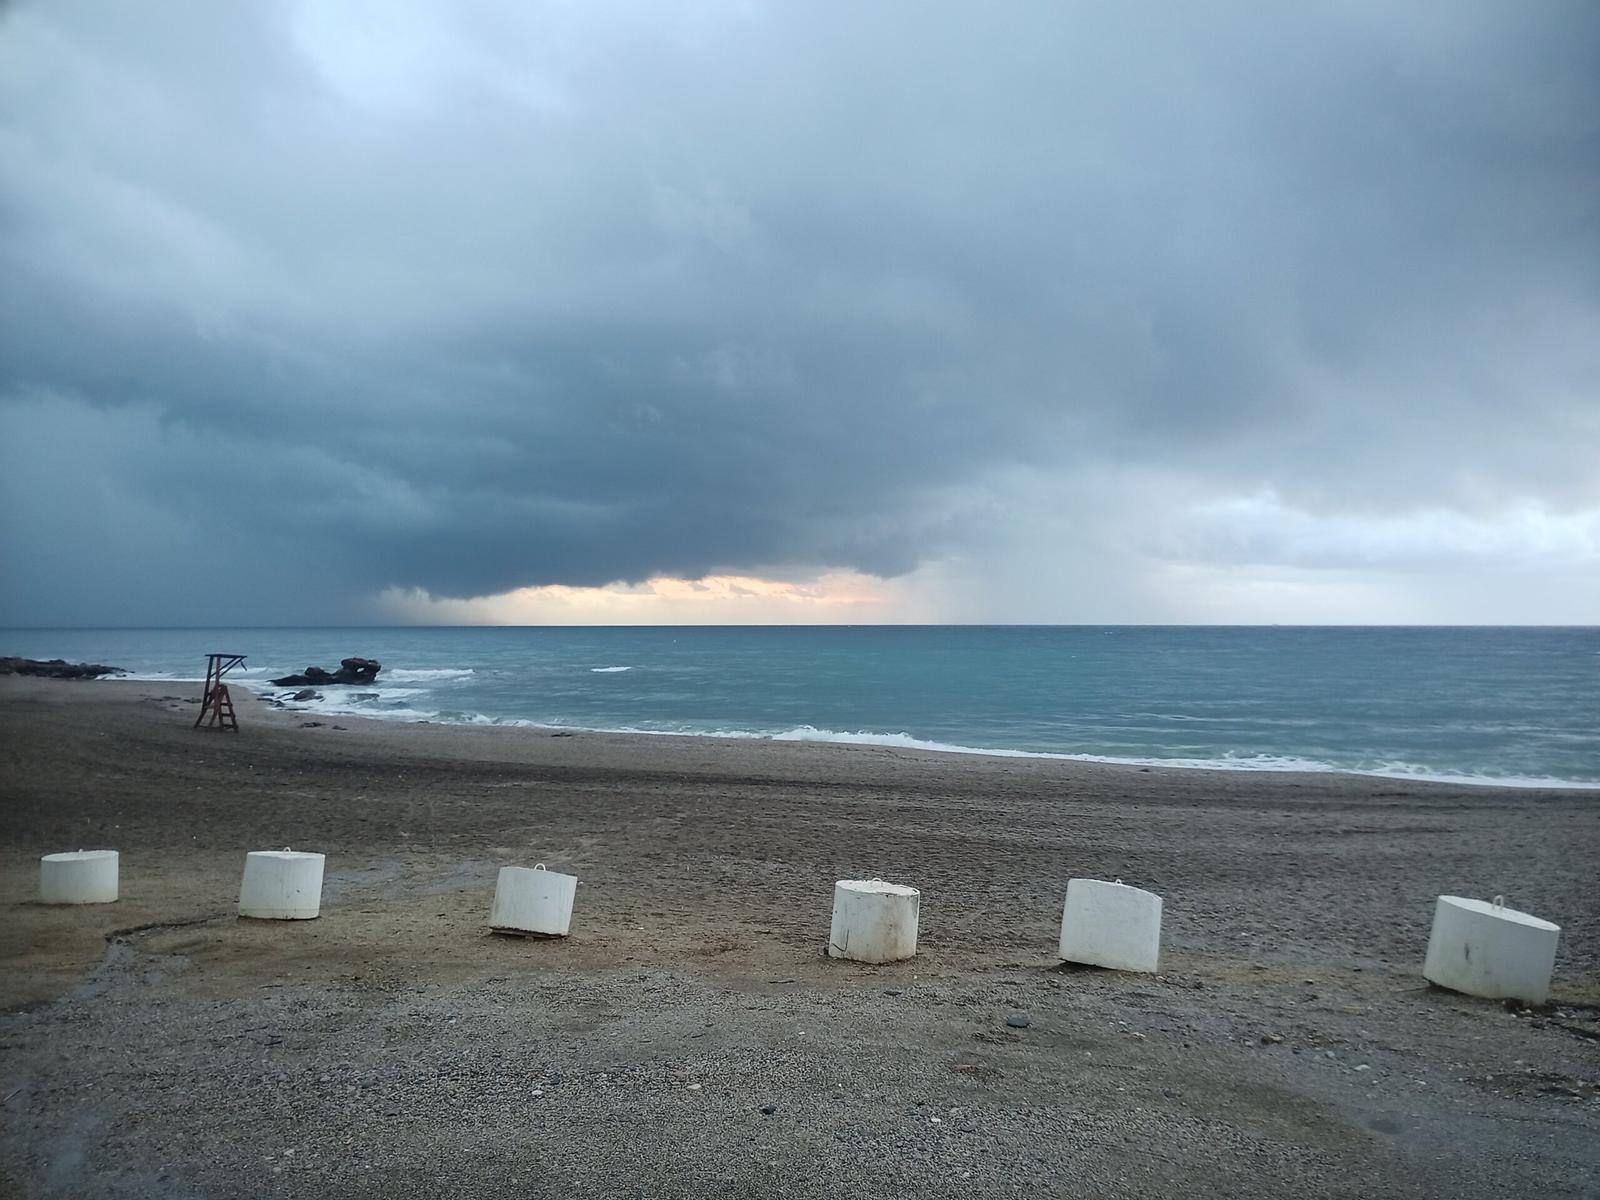 Storm clouds gather over a view of a beach with sea and large white stones on the beach